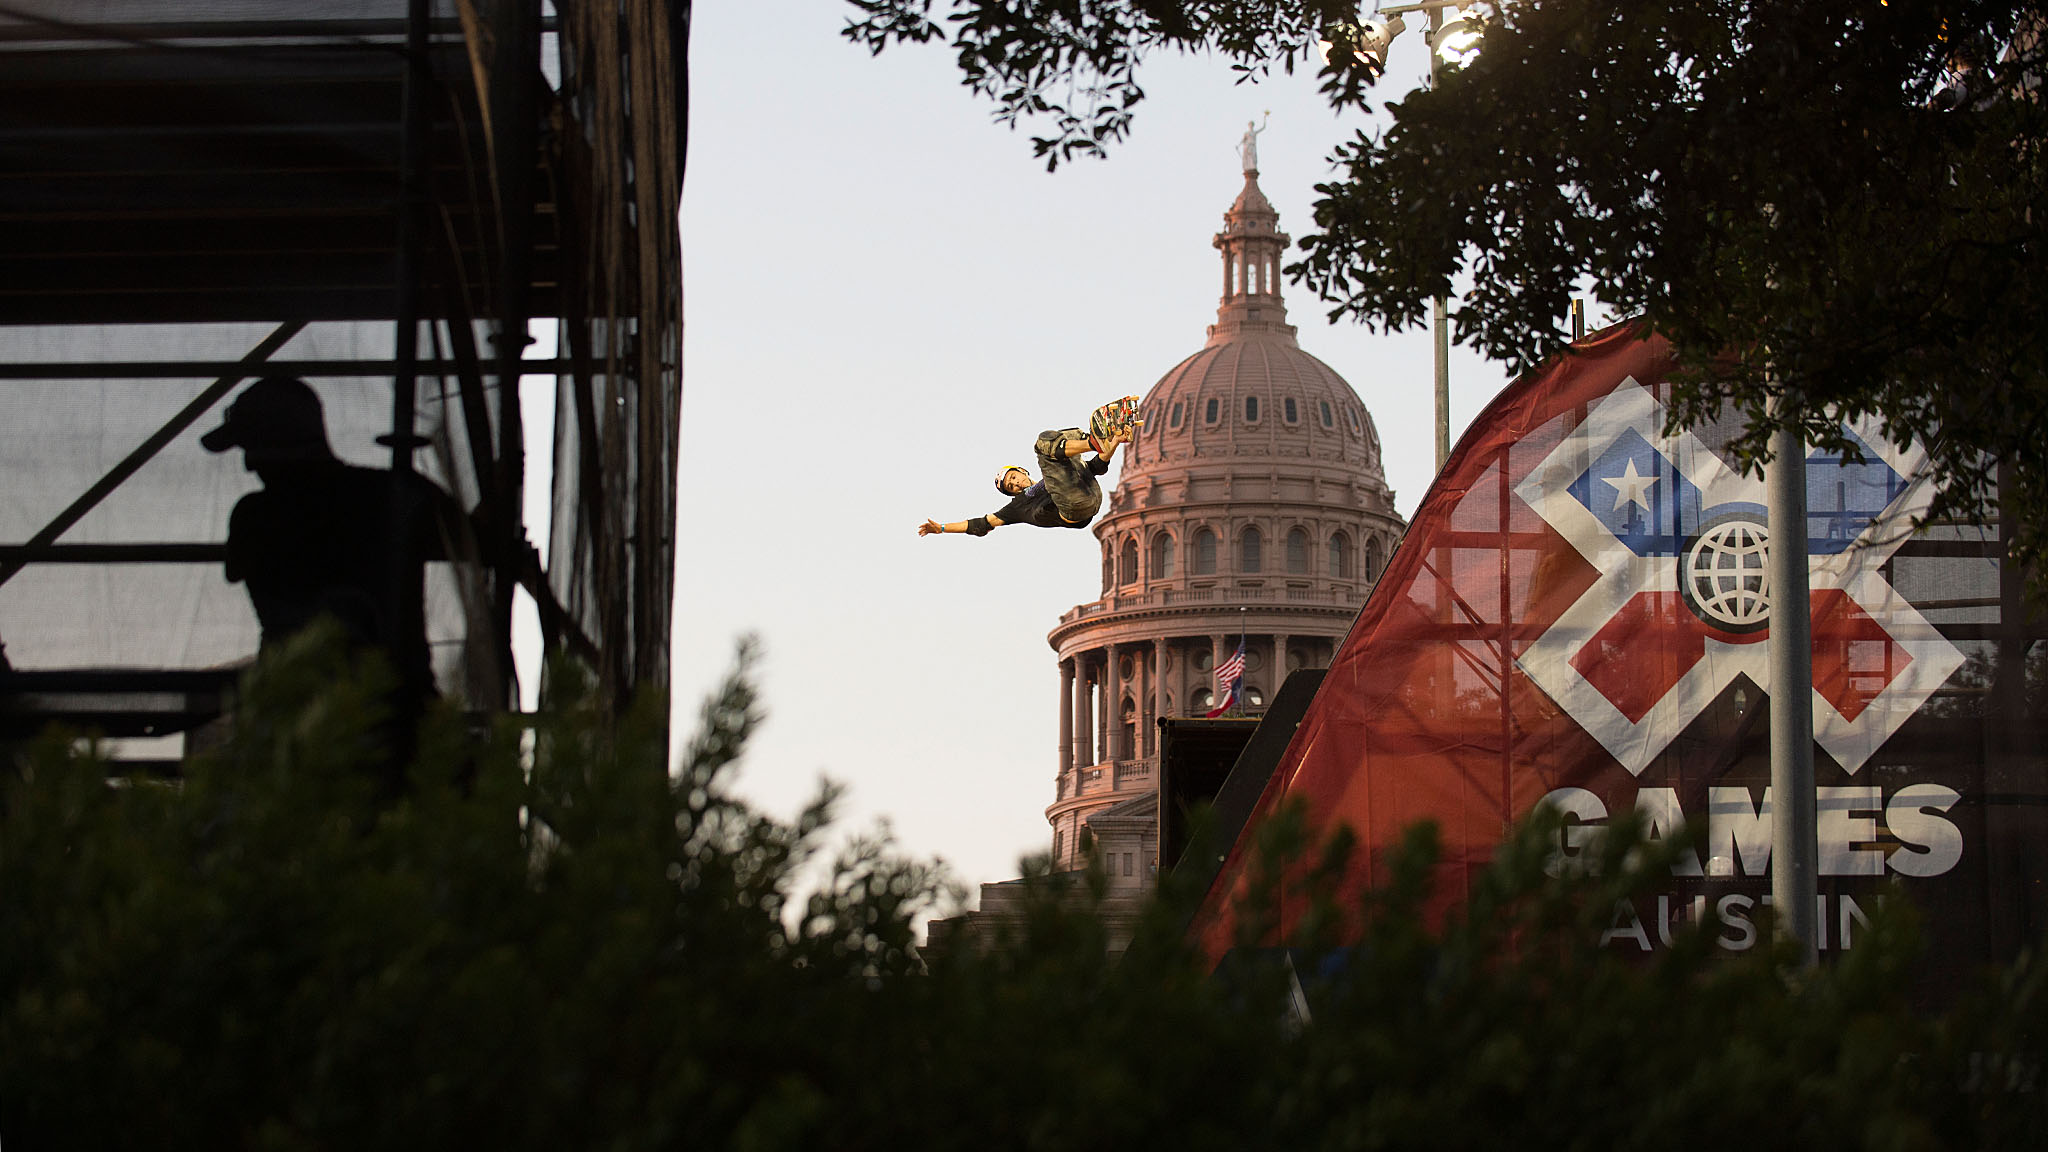 More than 12,000 fans packed the strip of land between the BMX and Skateboard Vert ramp and Texas State Capitol on as the first of many X Games Austin events kicked off with a bang on Thursday evening. Here, vert veteran Pierre-Luc Gagnon soars his way to the finals.